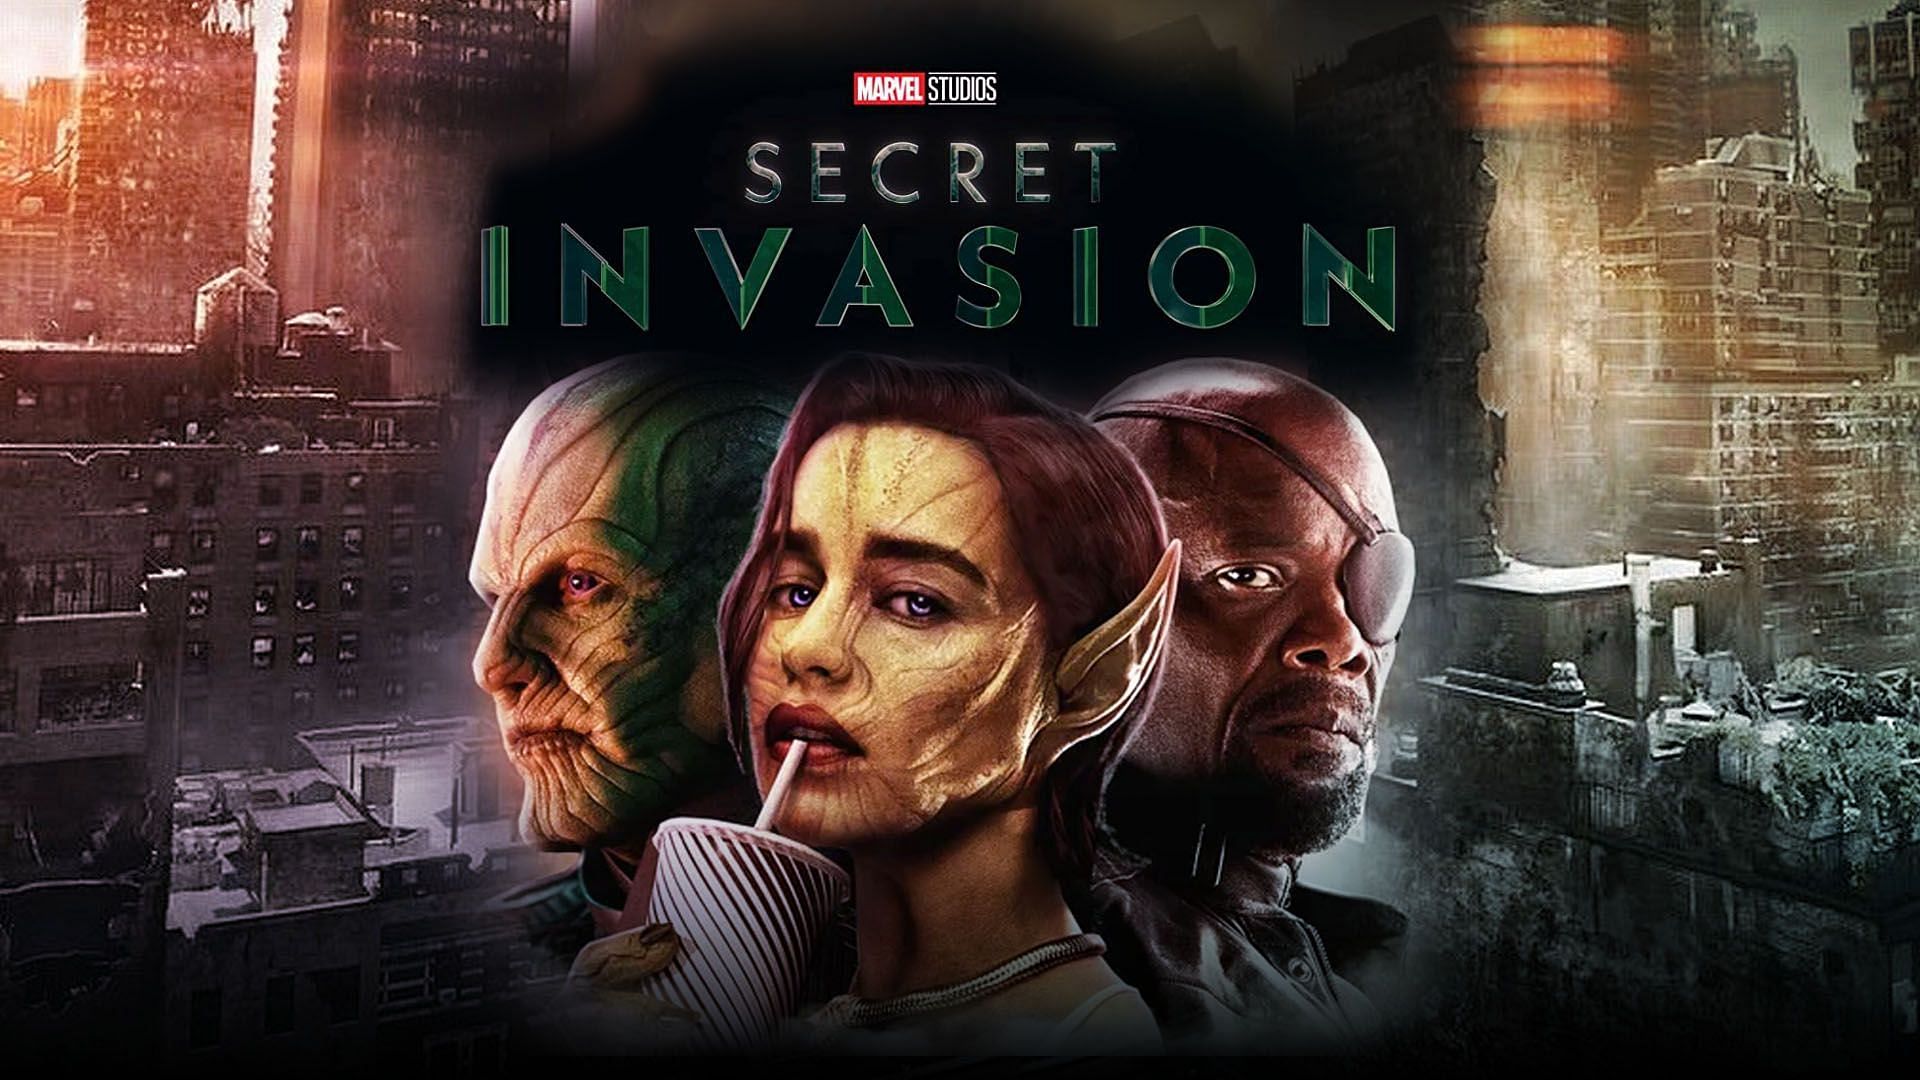 Secret Invasion Poster Released By Marvel Ahead of Trailer Debut